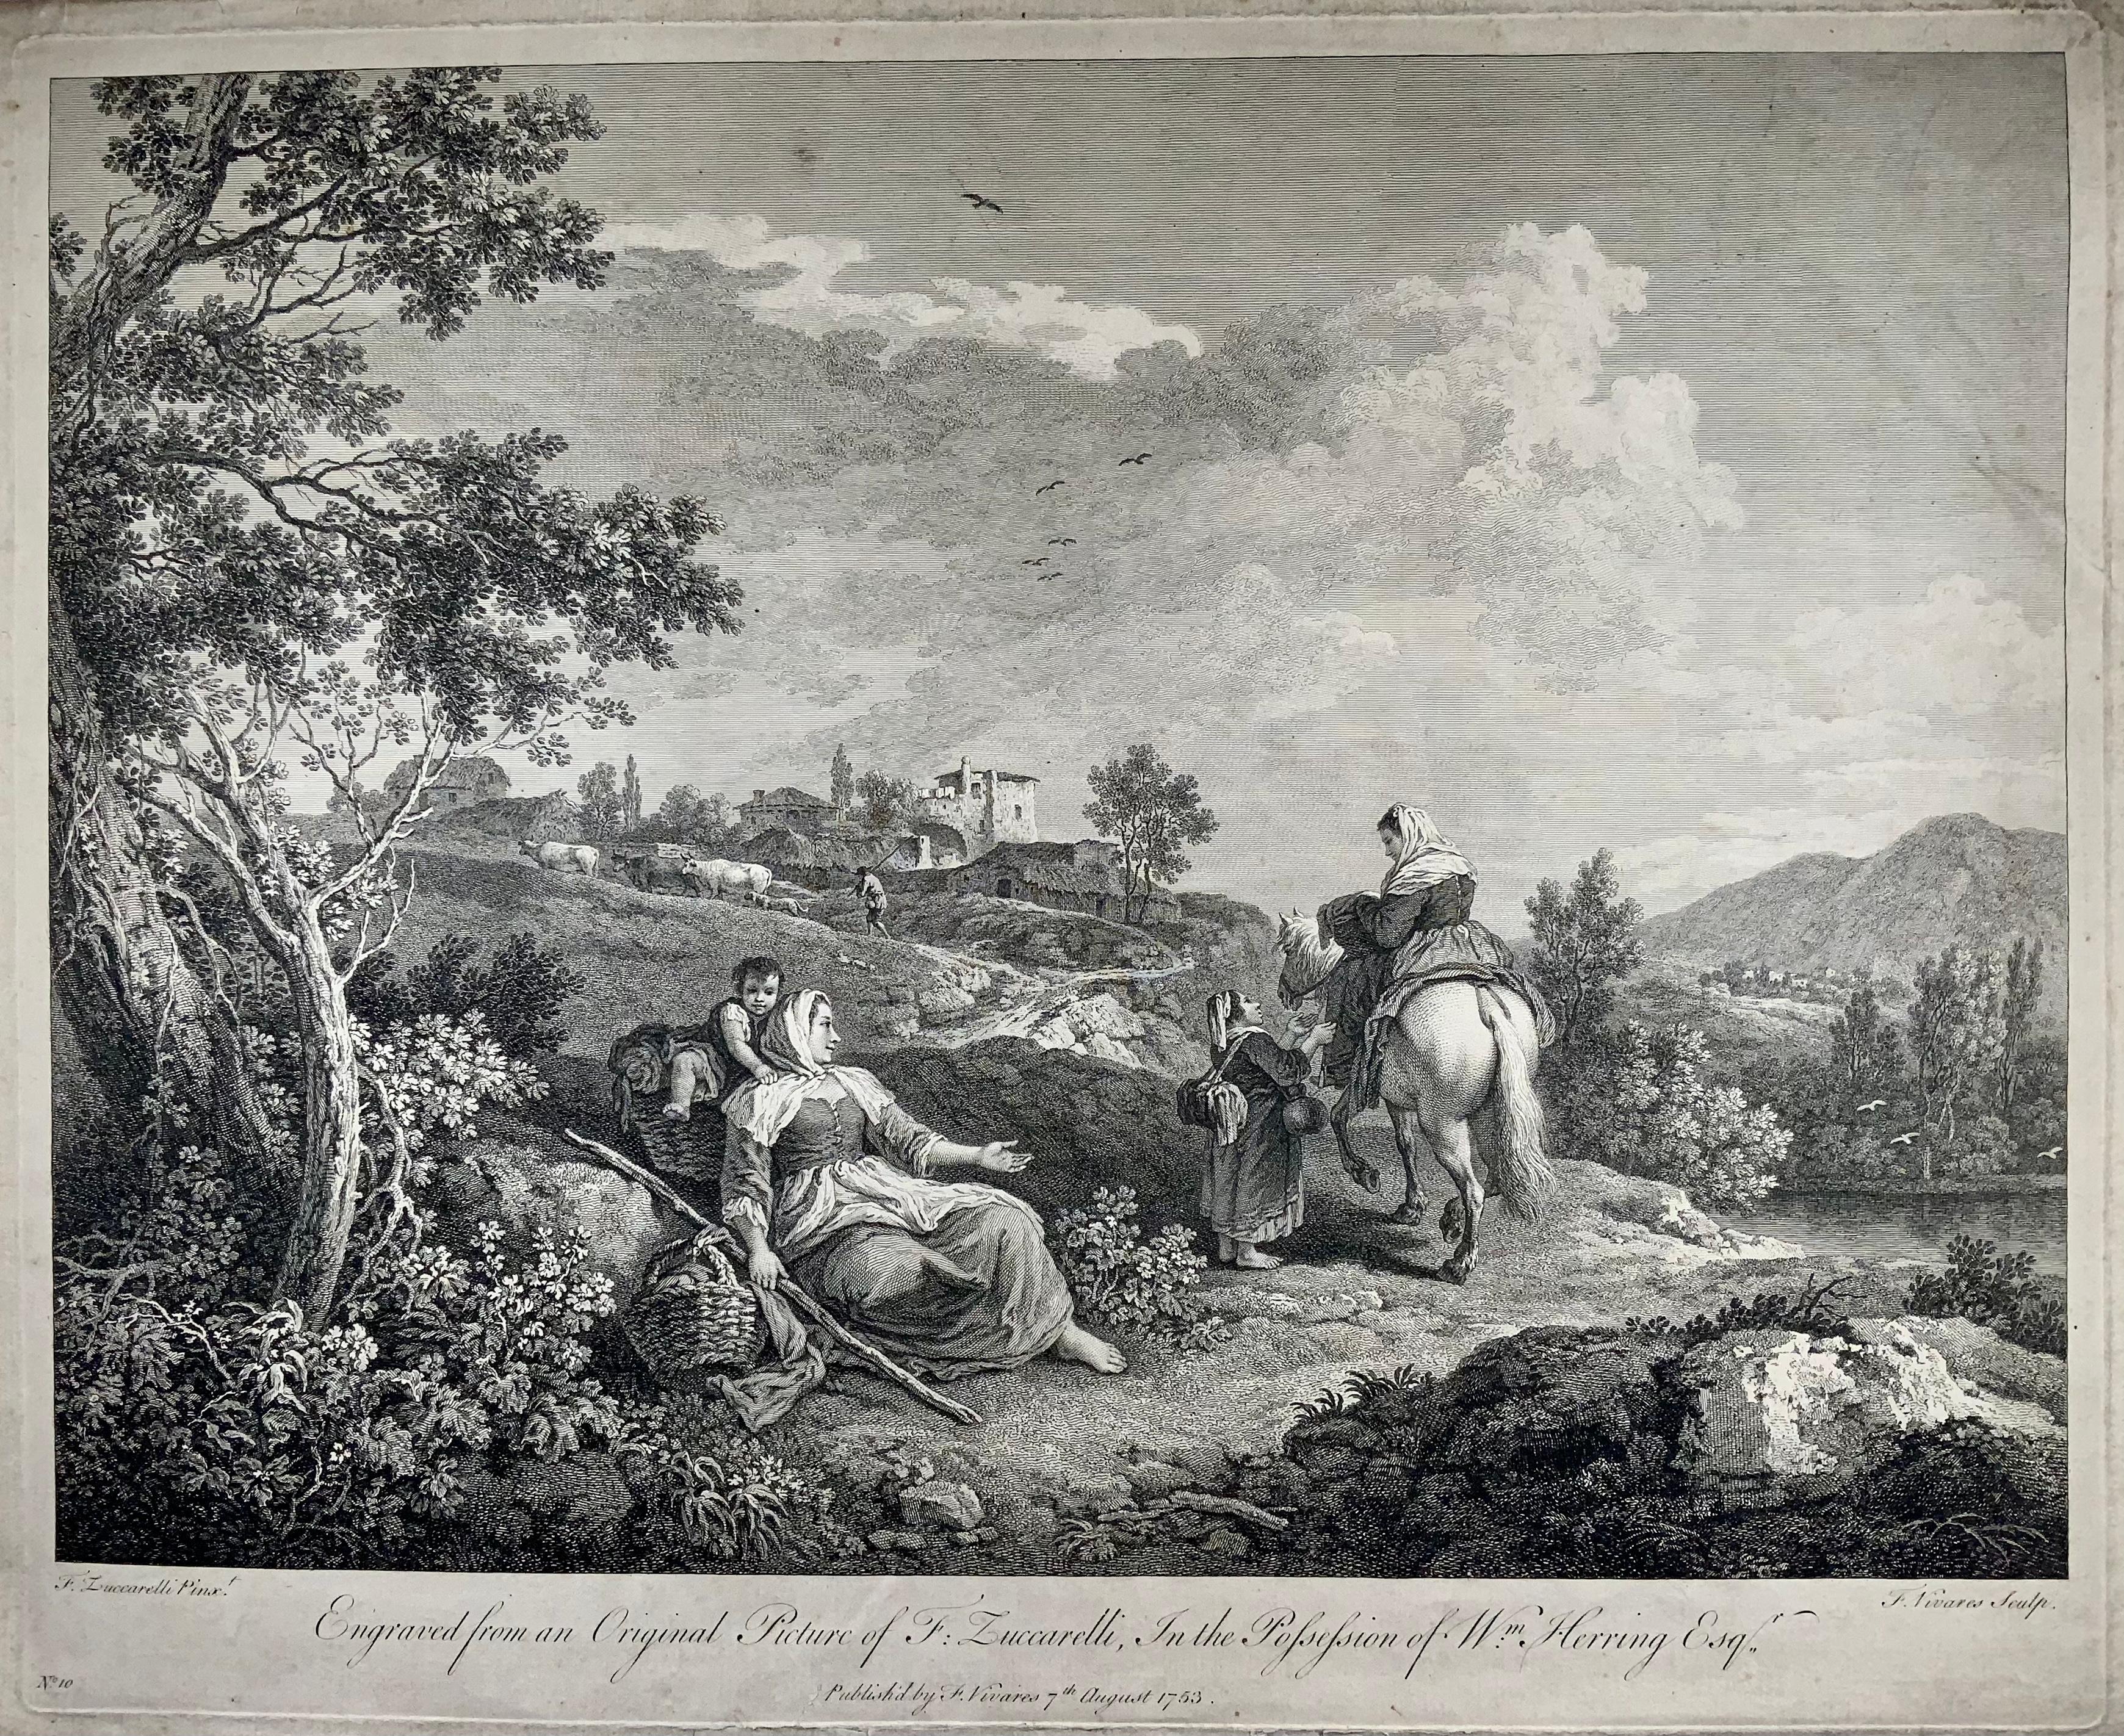 An impressive large format engraving of an Italianate scene after Francesco Zuccarelli RA (1702-1788) engraved by François Vivares (1709-1780).

Very much of the late Baroque or Rococo period this beautiful Italian pastoral scene depicts a peasant